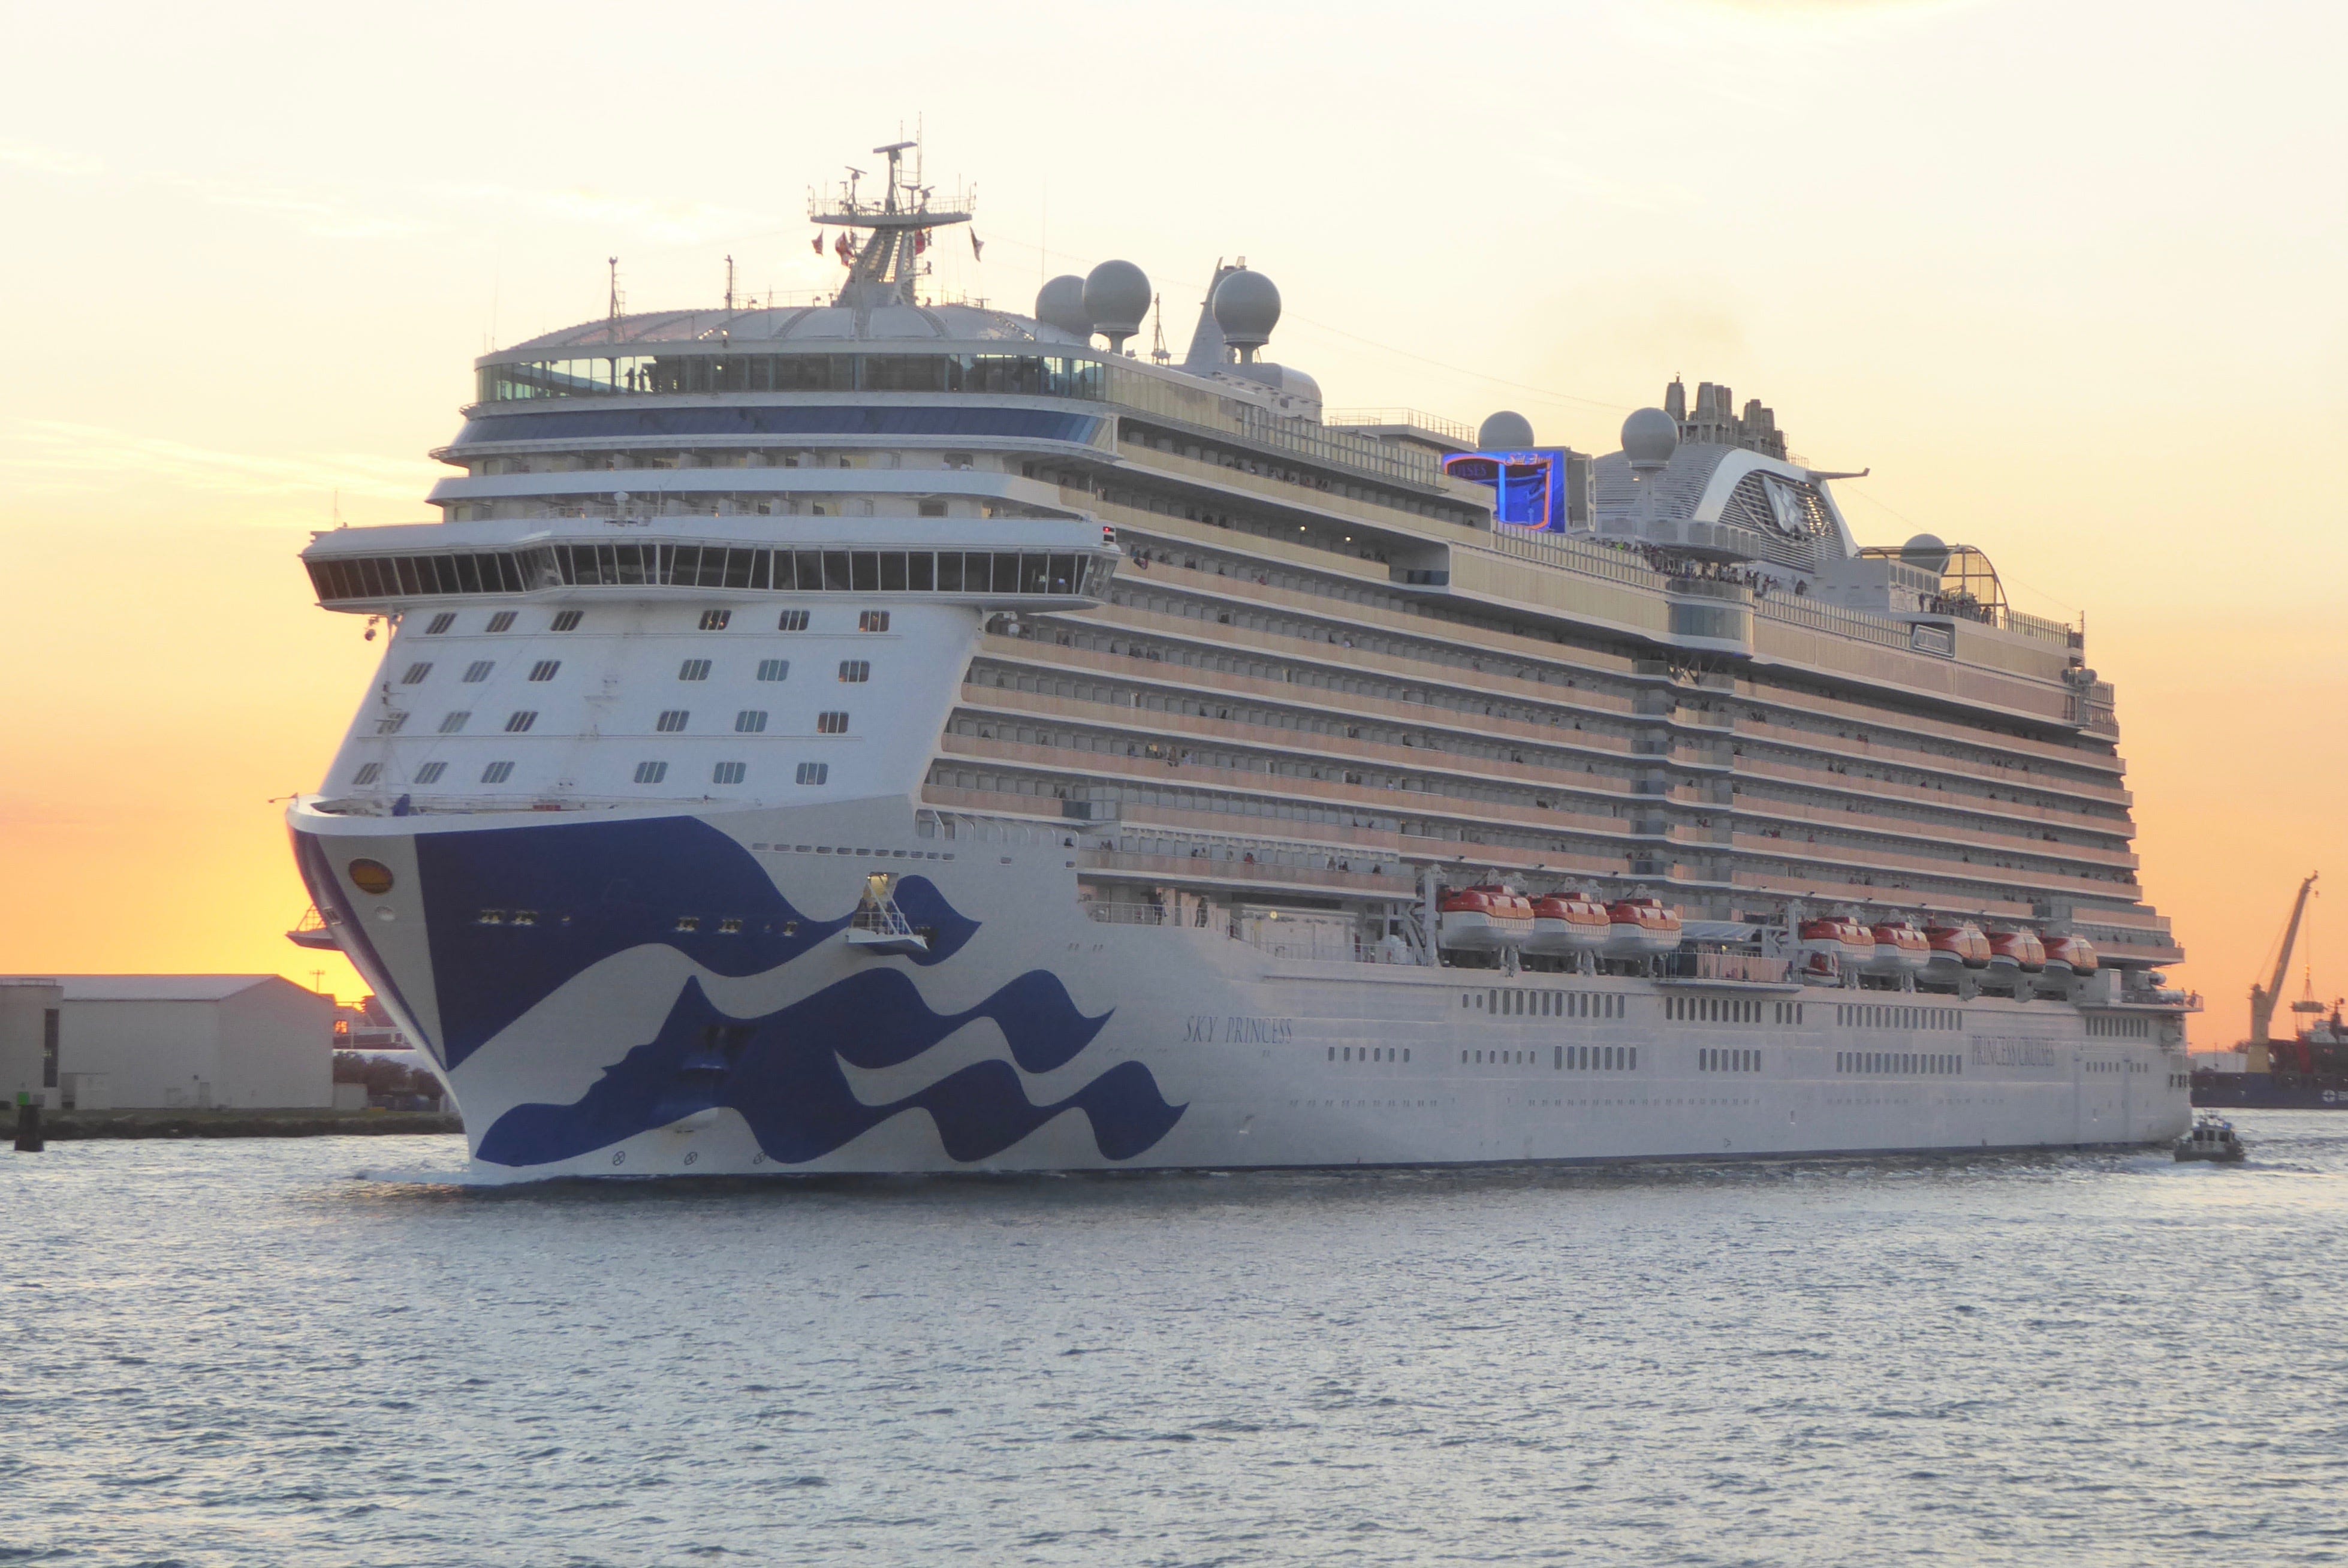 Princess Cruises Responds After Marriage Story Star Sues For Bedbugs